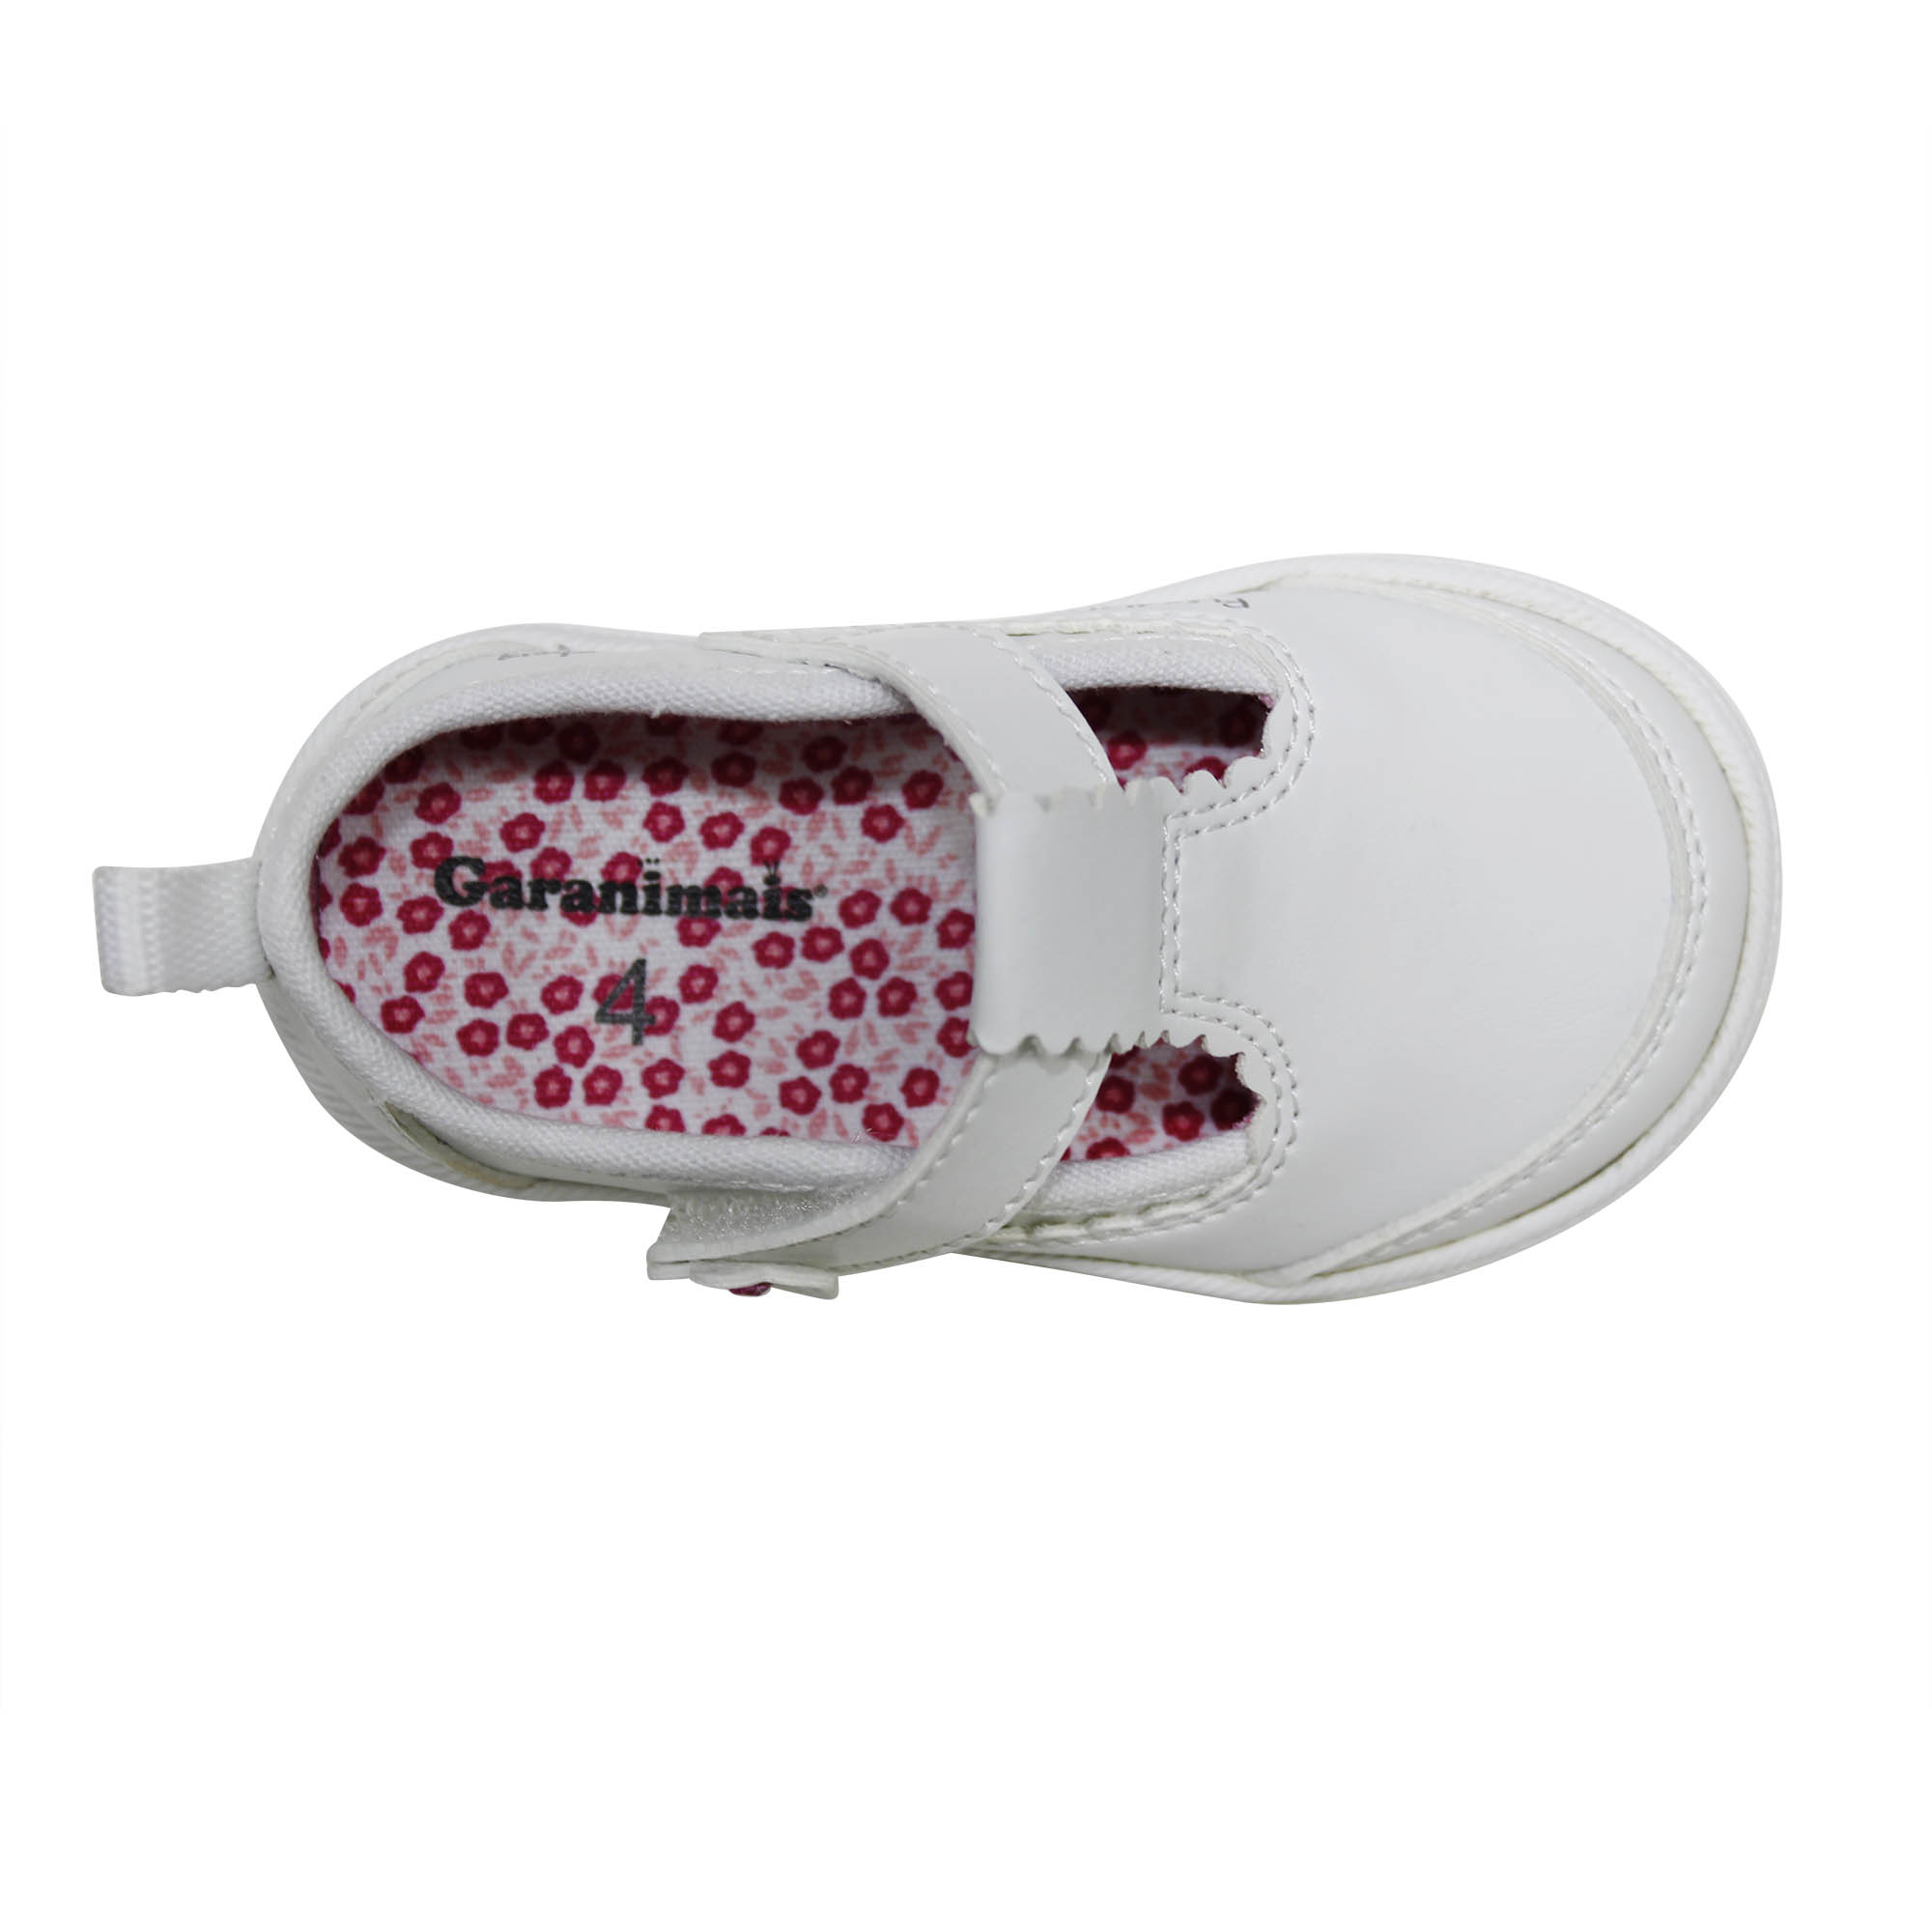 Infant Girl Garanimals Lauraie Casual shoes - image 4 of 6